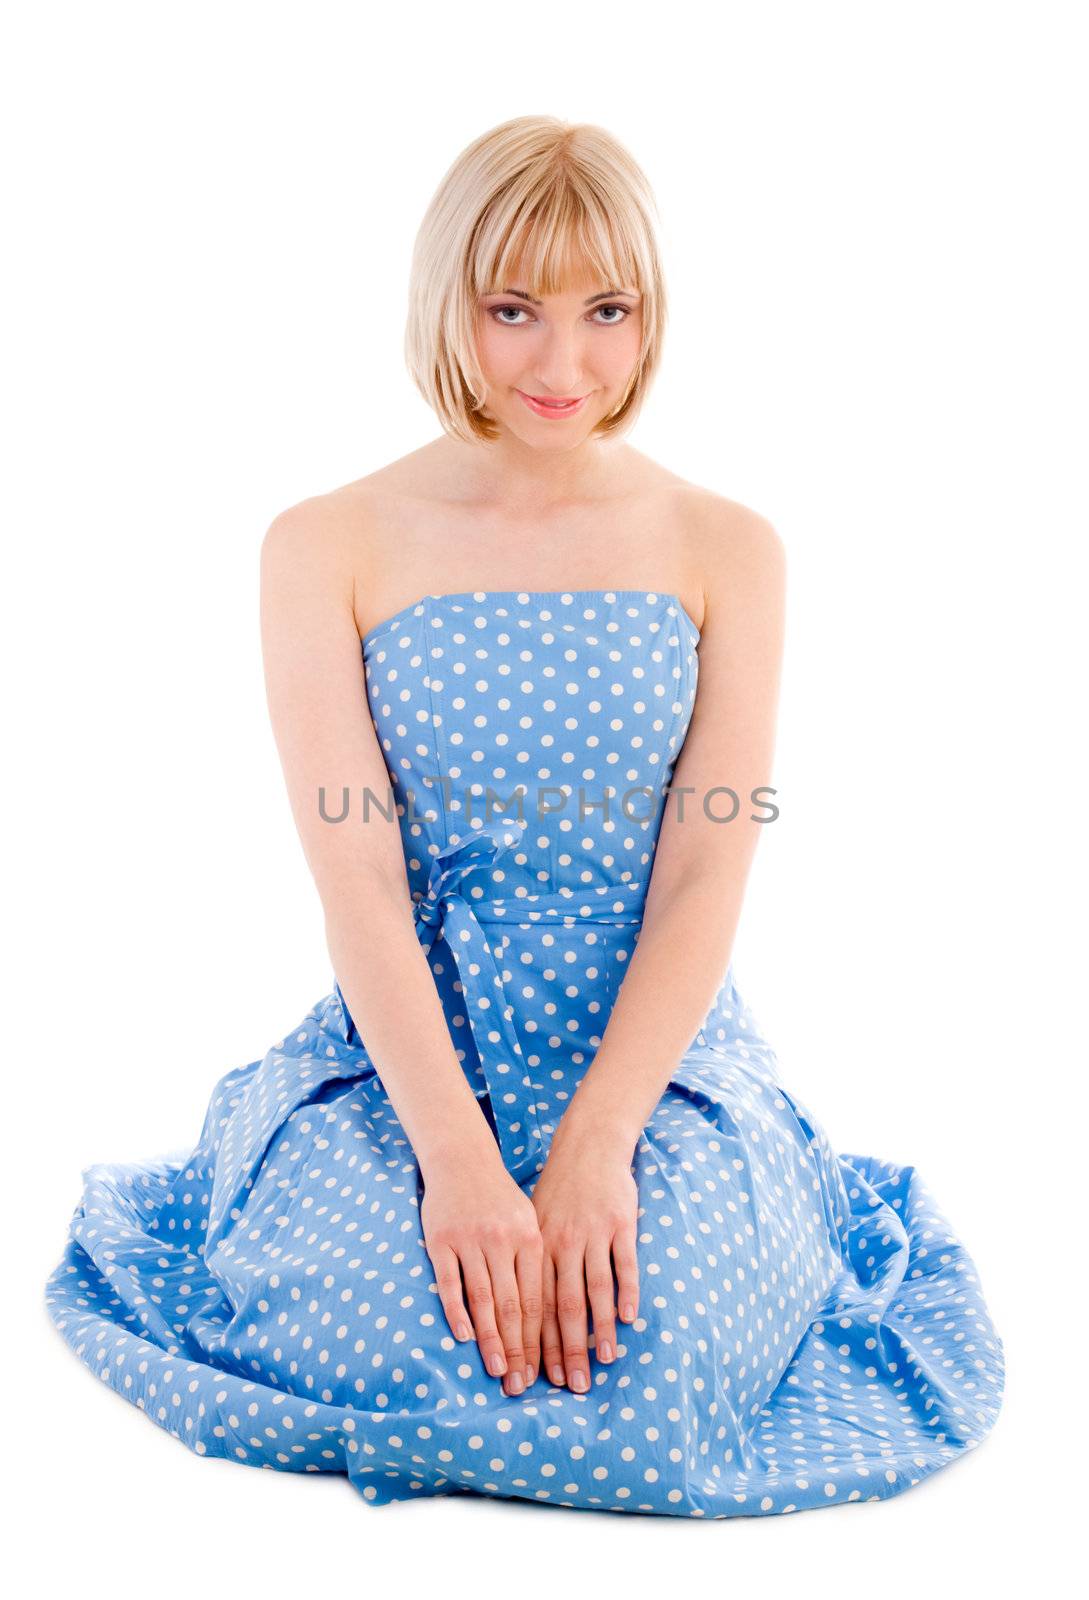 Sitting woman in blue polka dot dress on isolated white